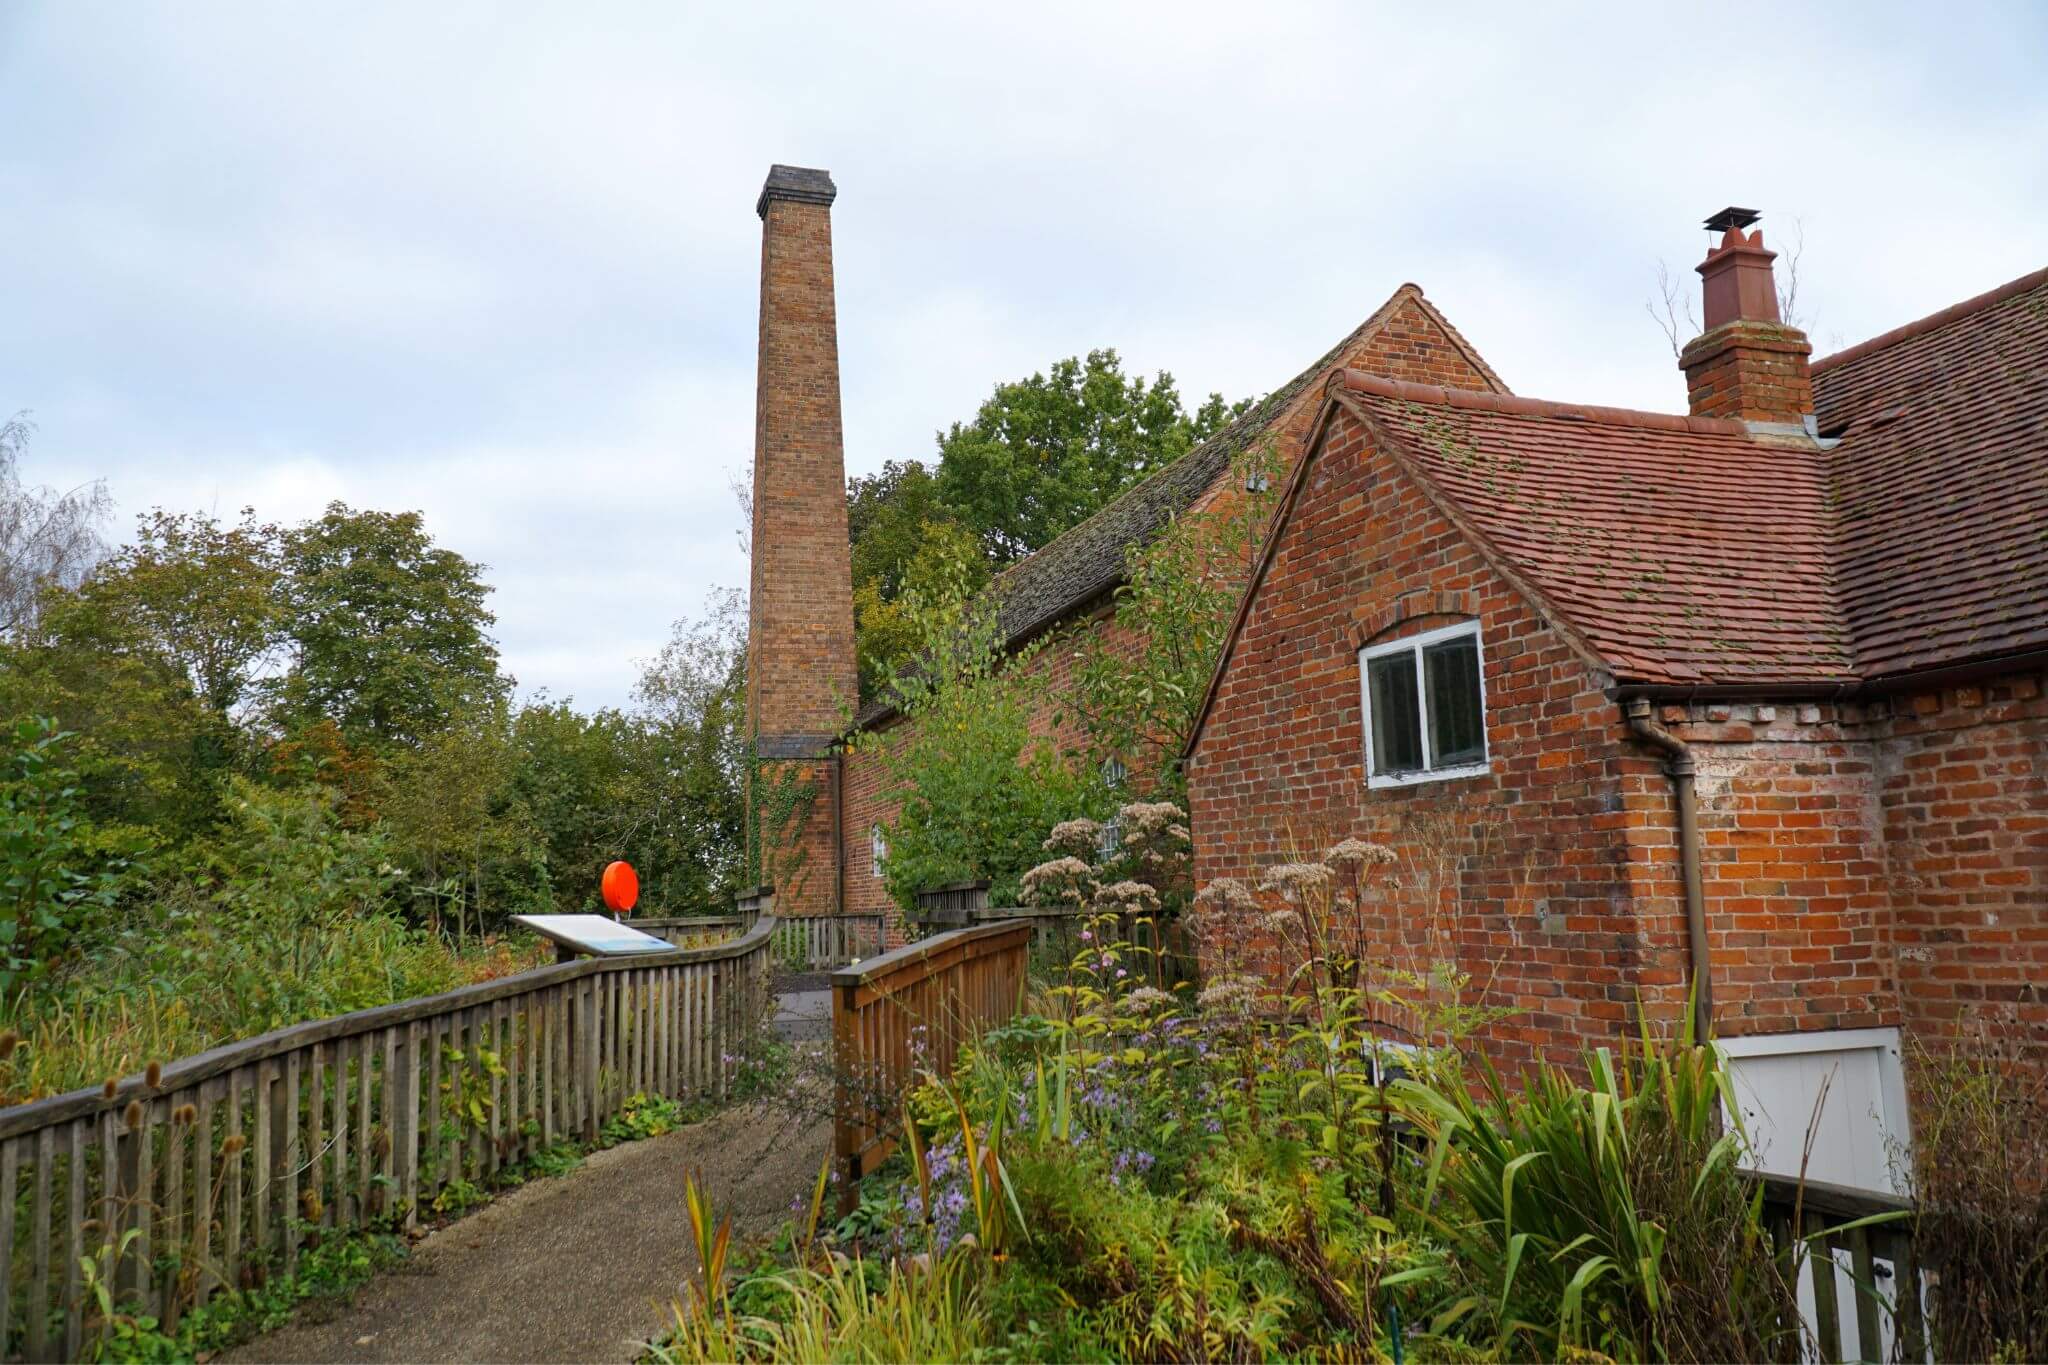 Sarehole Mill, J.R.R Tolkien Origins of Middle Earth Tour